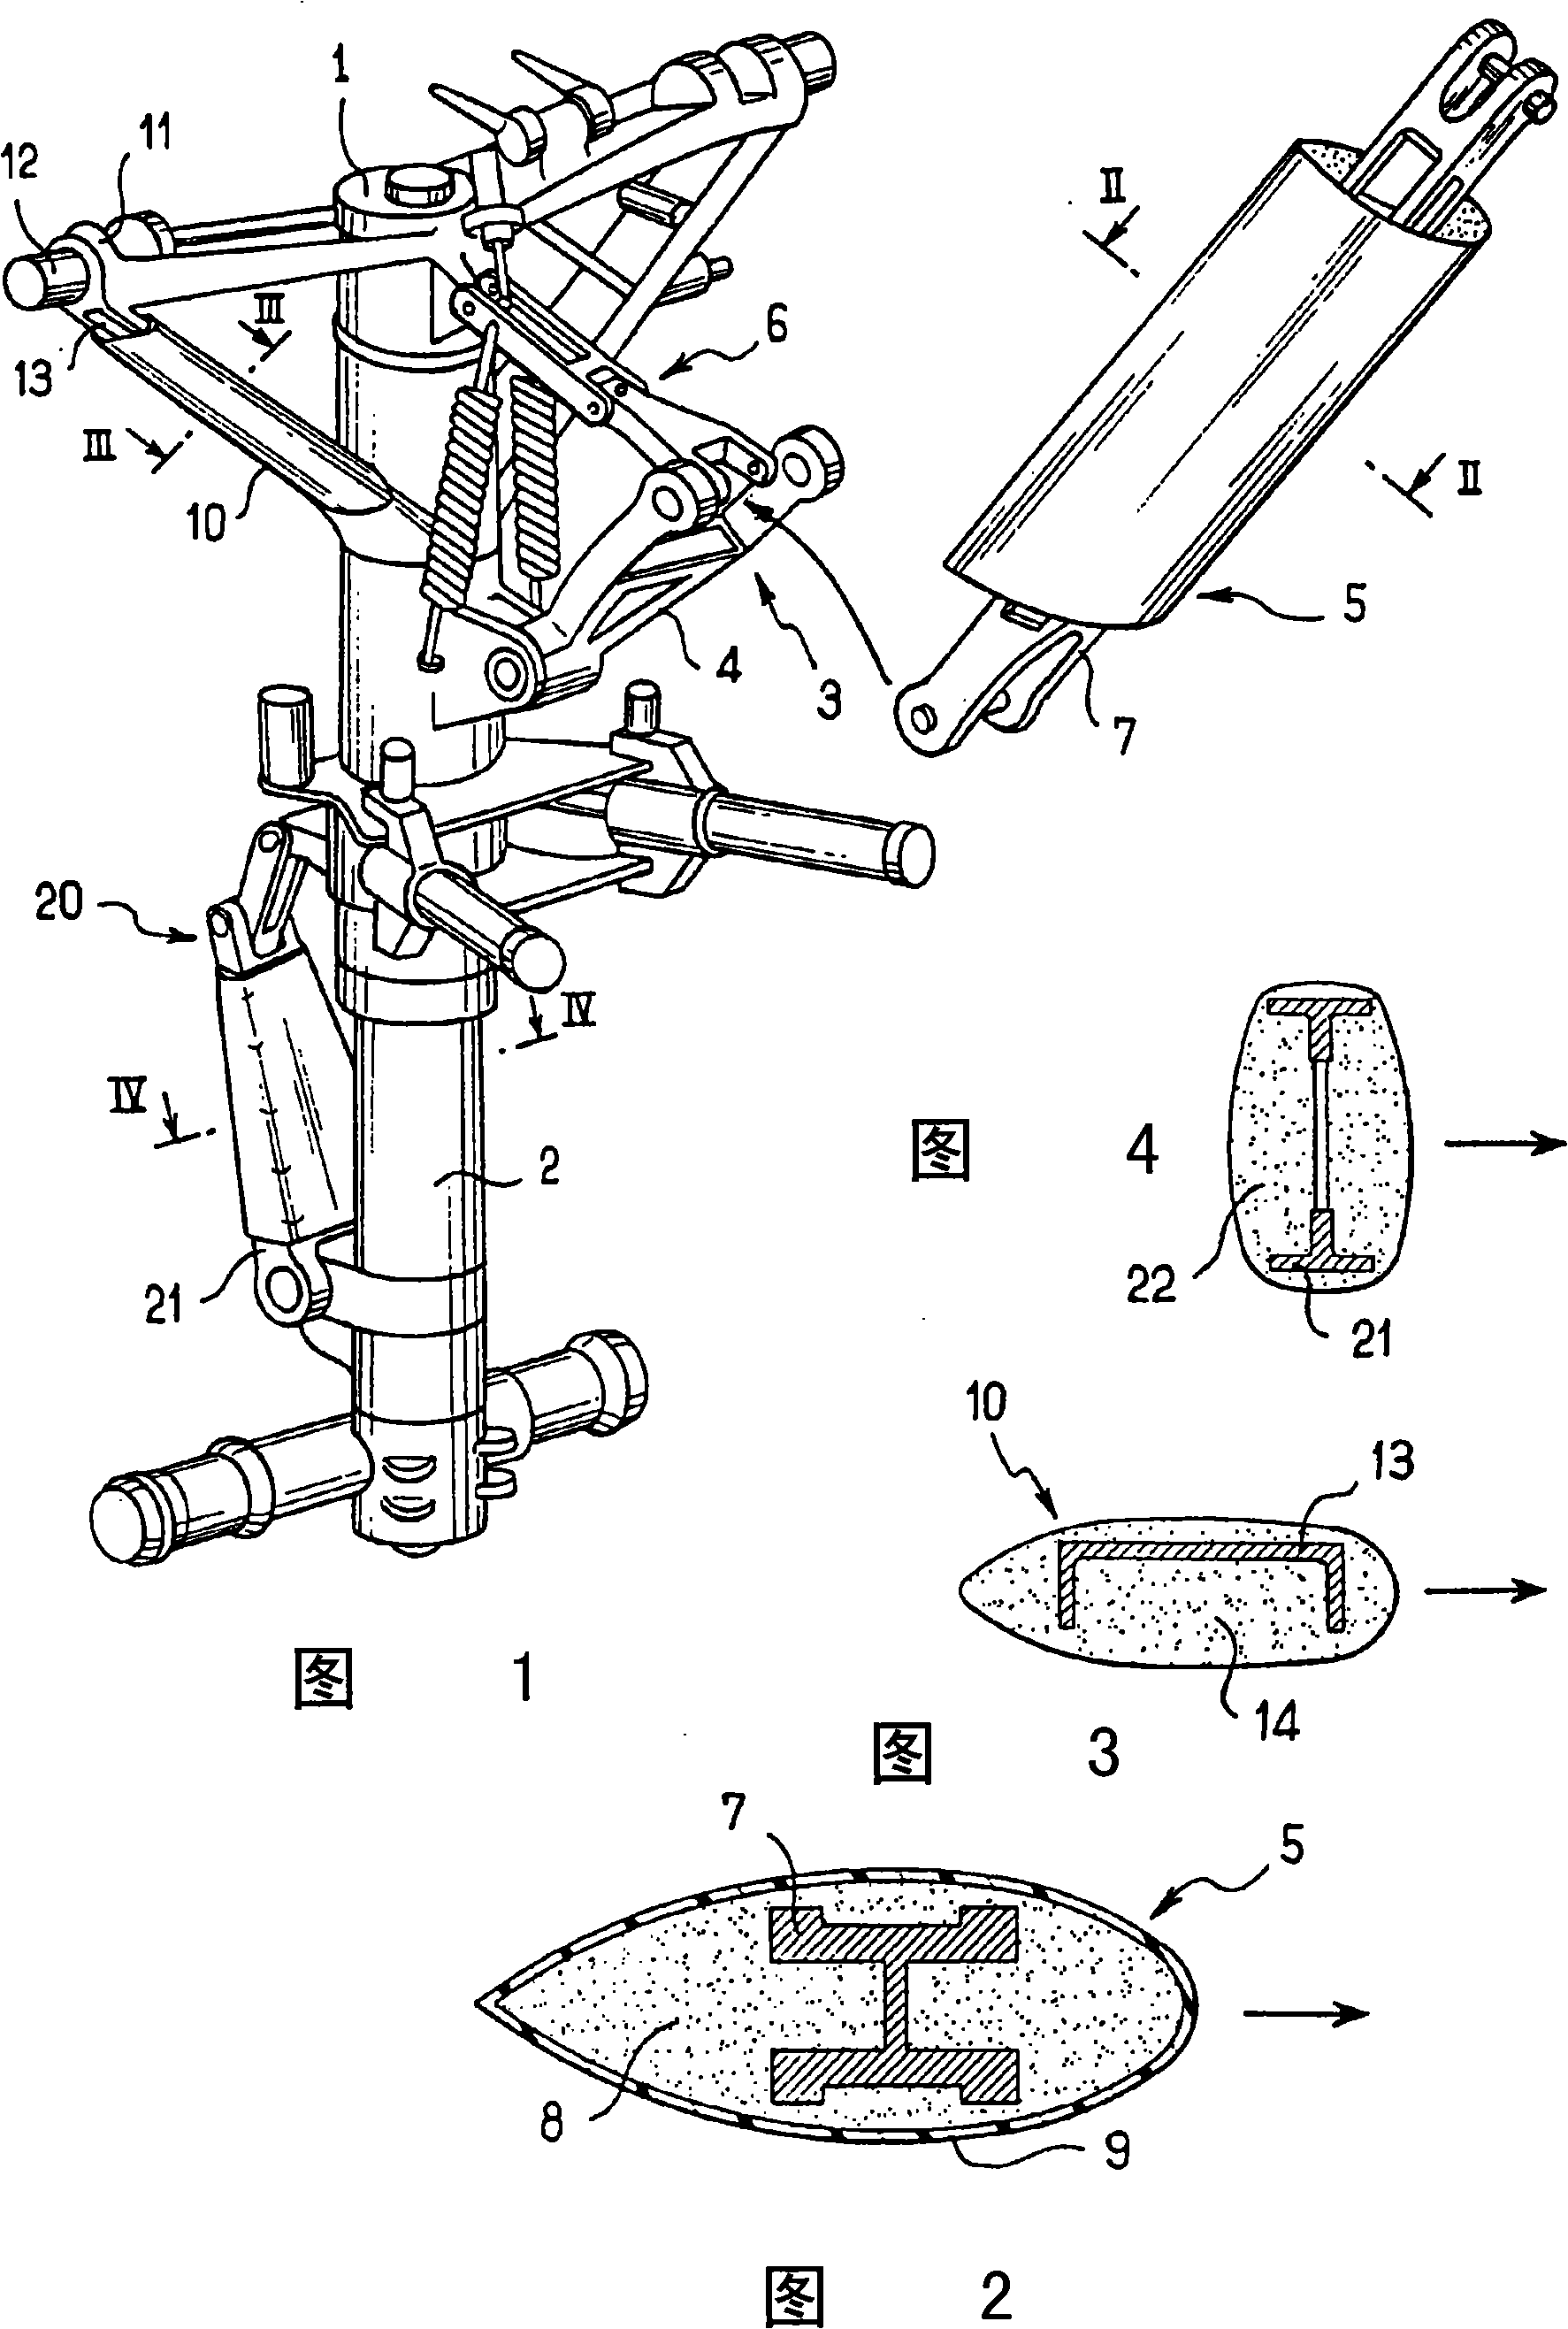 Method of reducing the aerodynamic noise generated by an aircraft landing gear